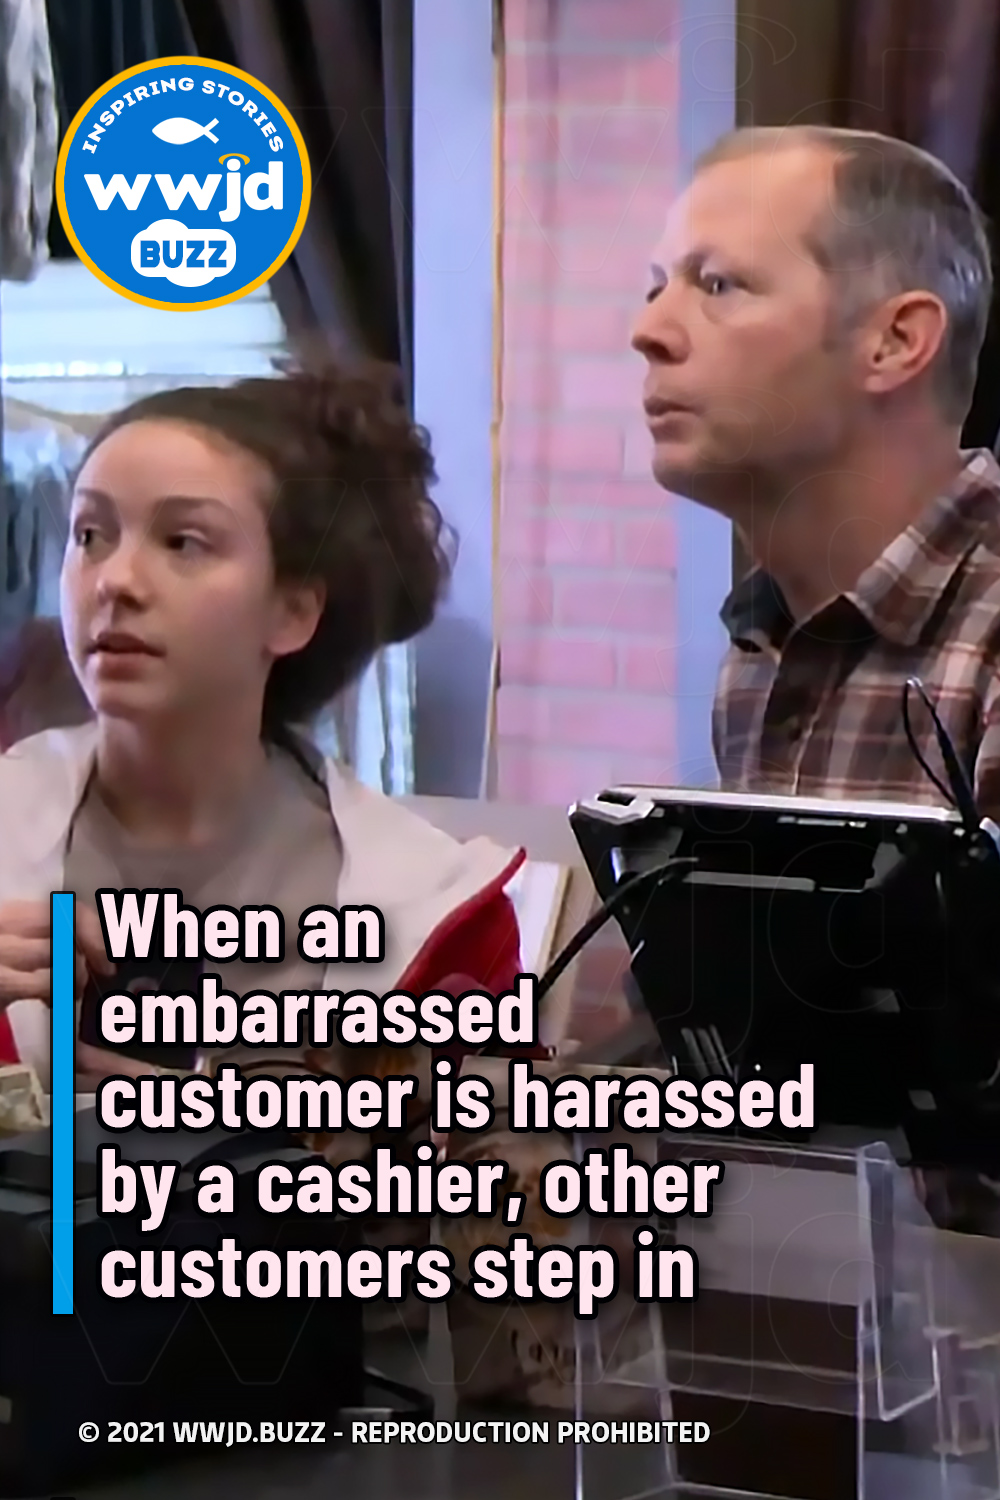 When an embarrassed customer is harassed by a cashier, other customers step in